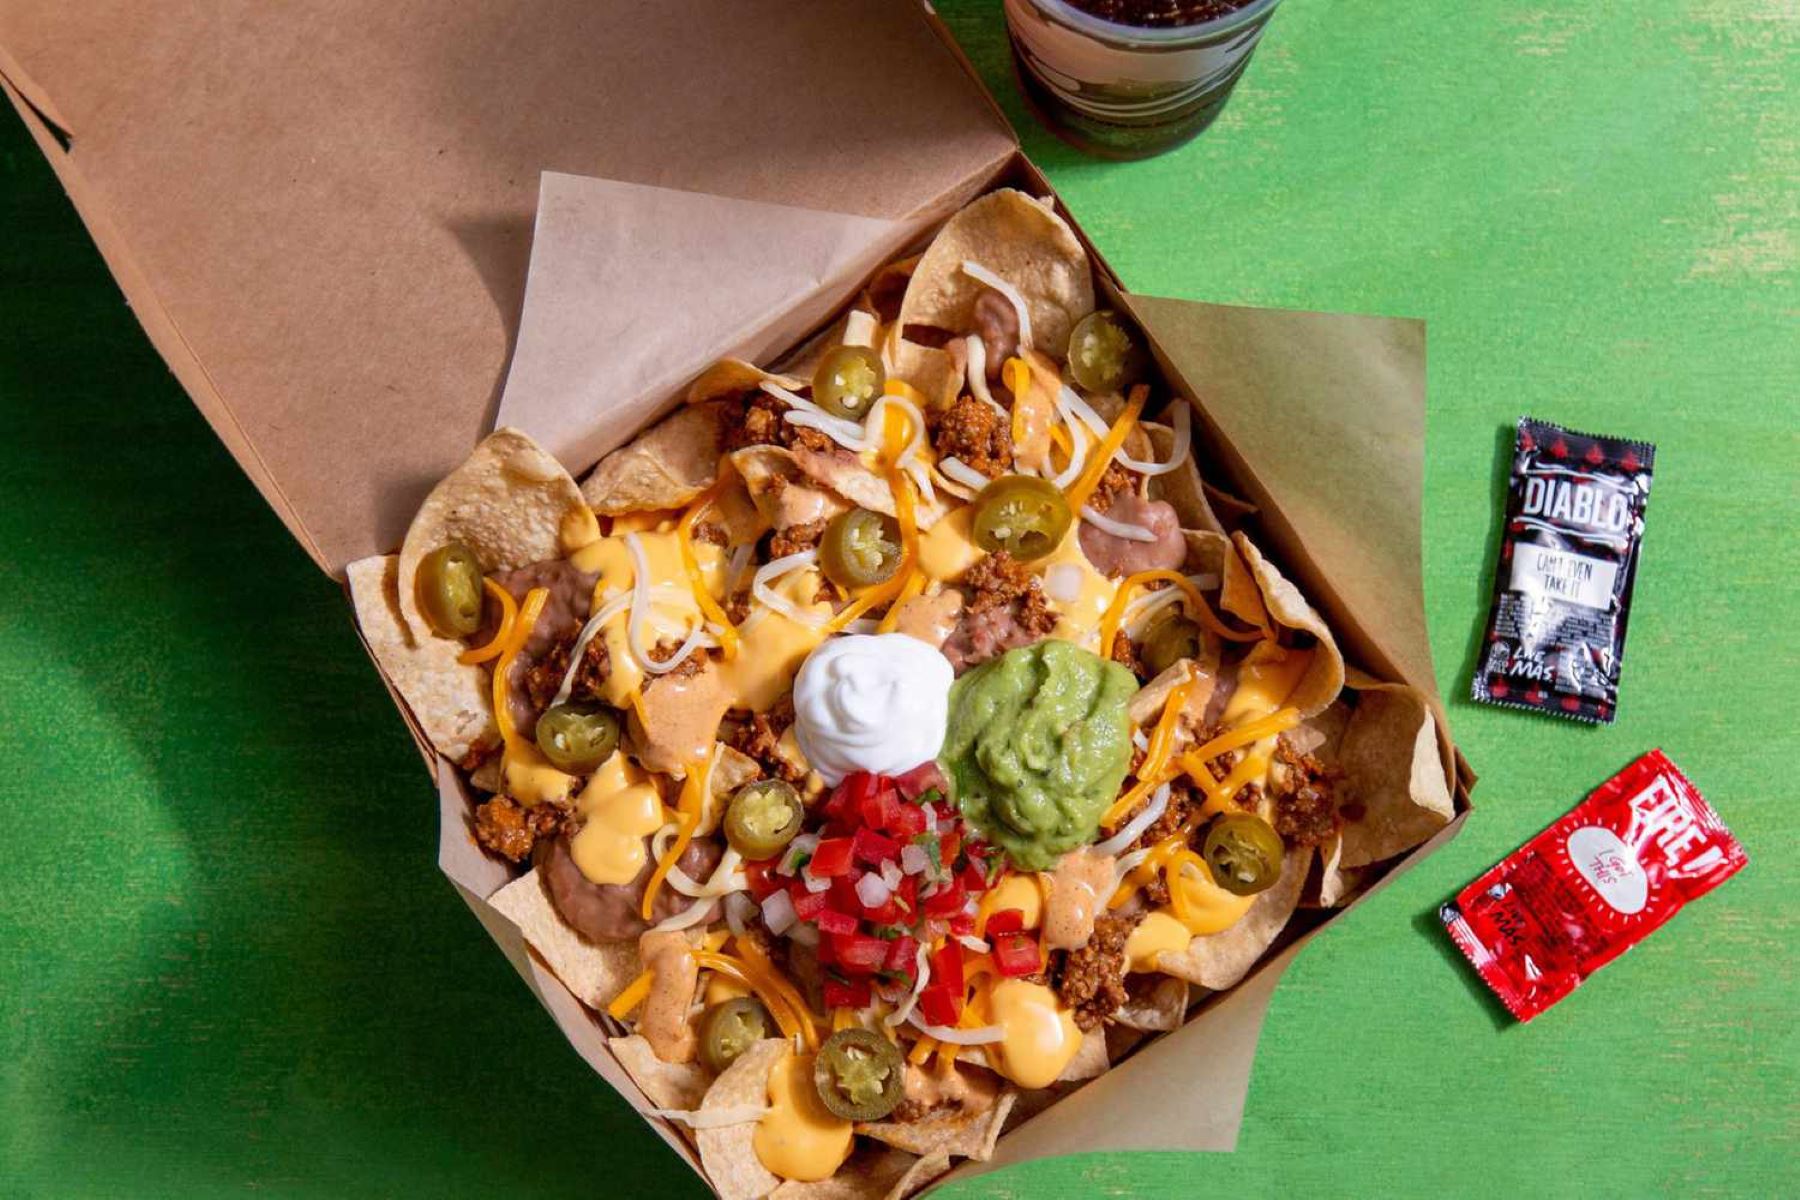 Taco Bell's Happy Hour: Unleash Your Taste Buds With These Amazing Deals!